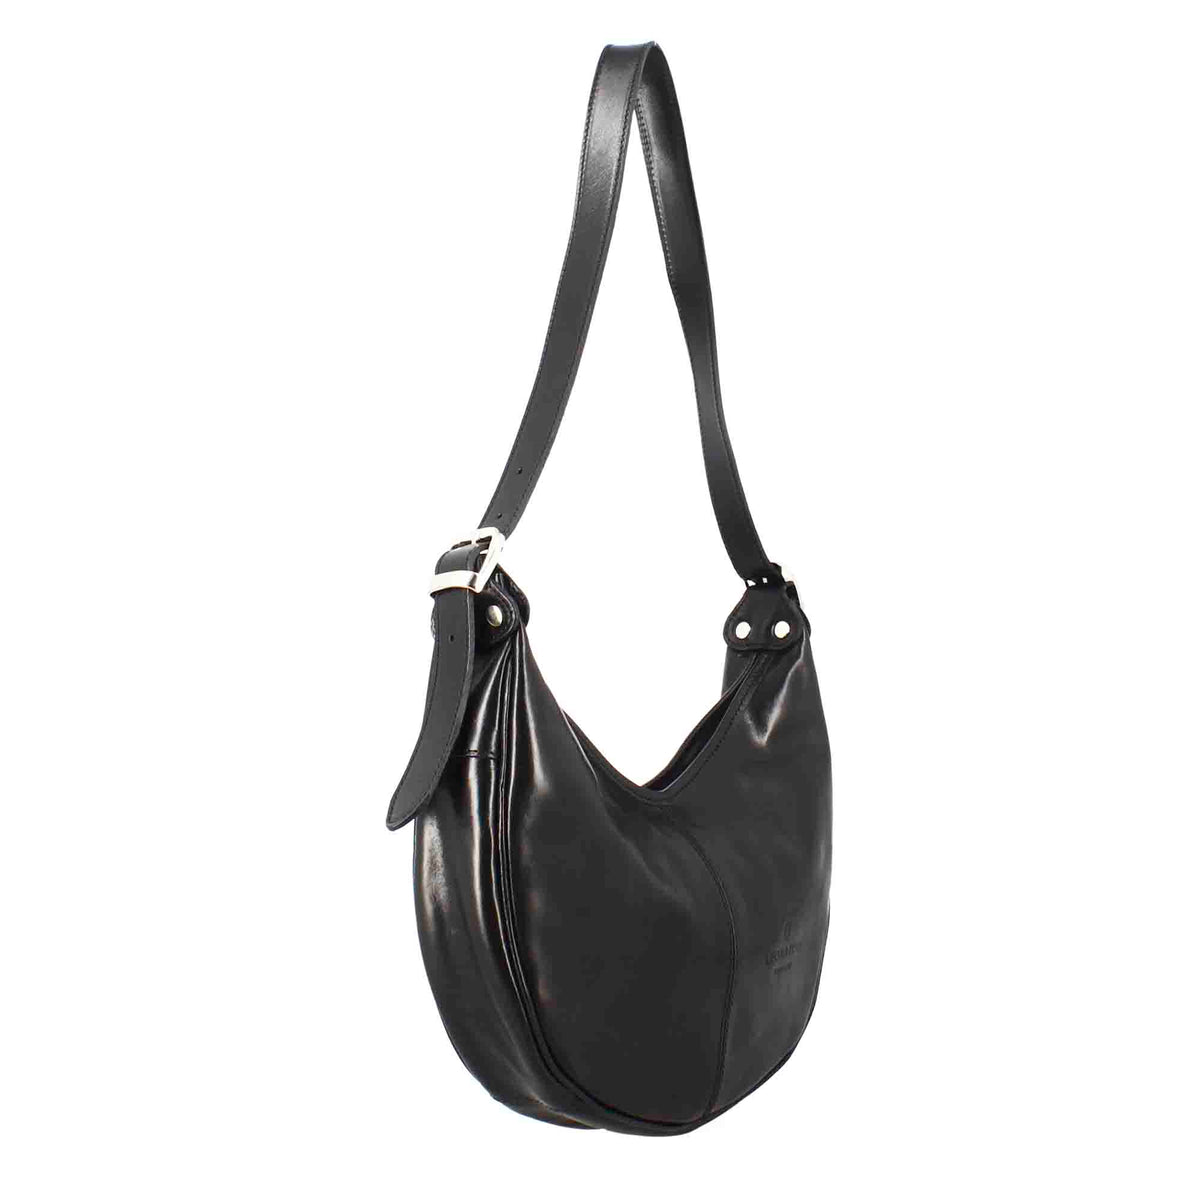 Classic women's City shopper bag in black smooth leather